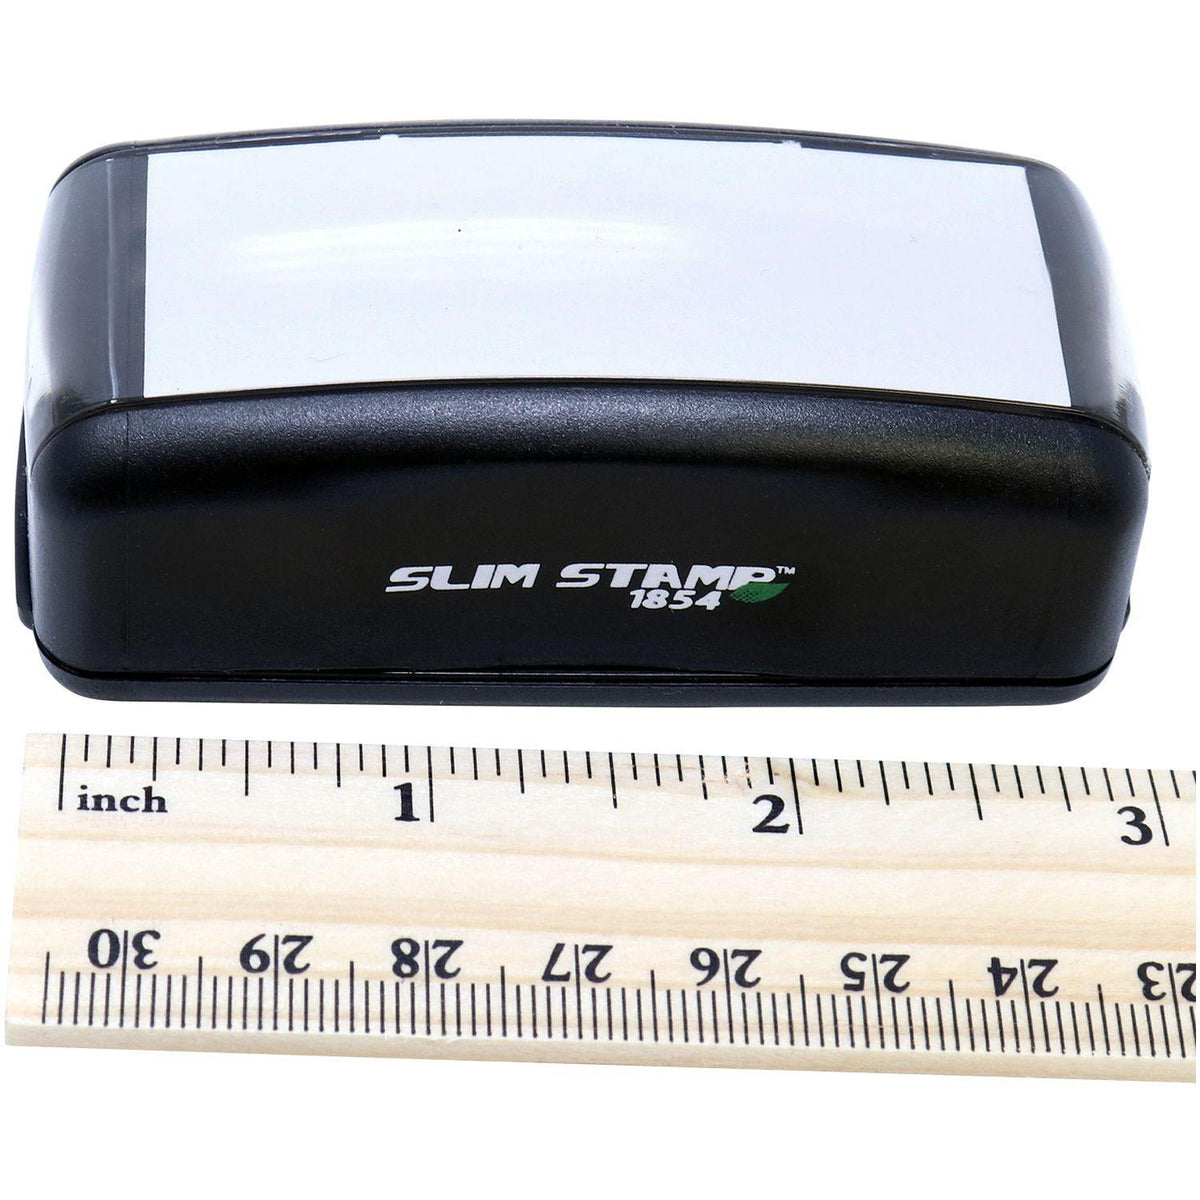 Measurement Large Pre Inked Attorneys Copy Stamp with Ruler